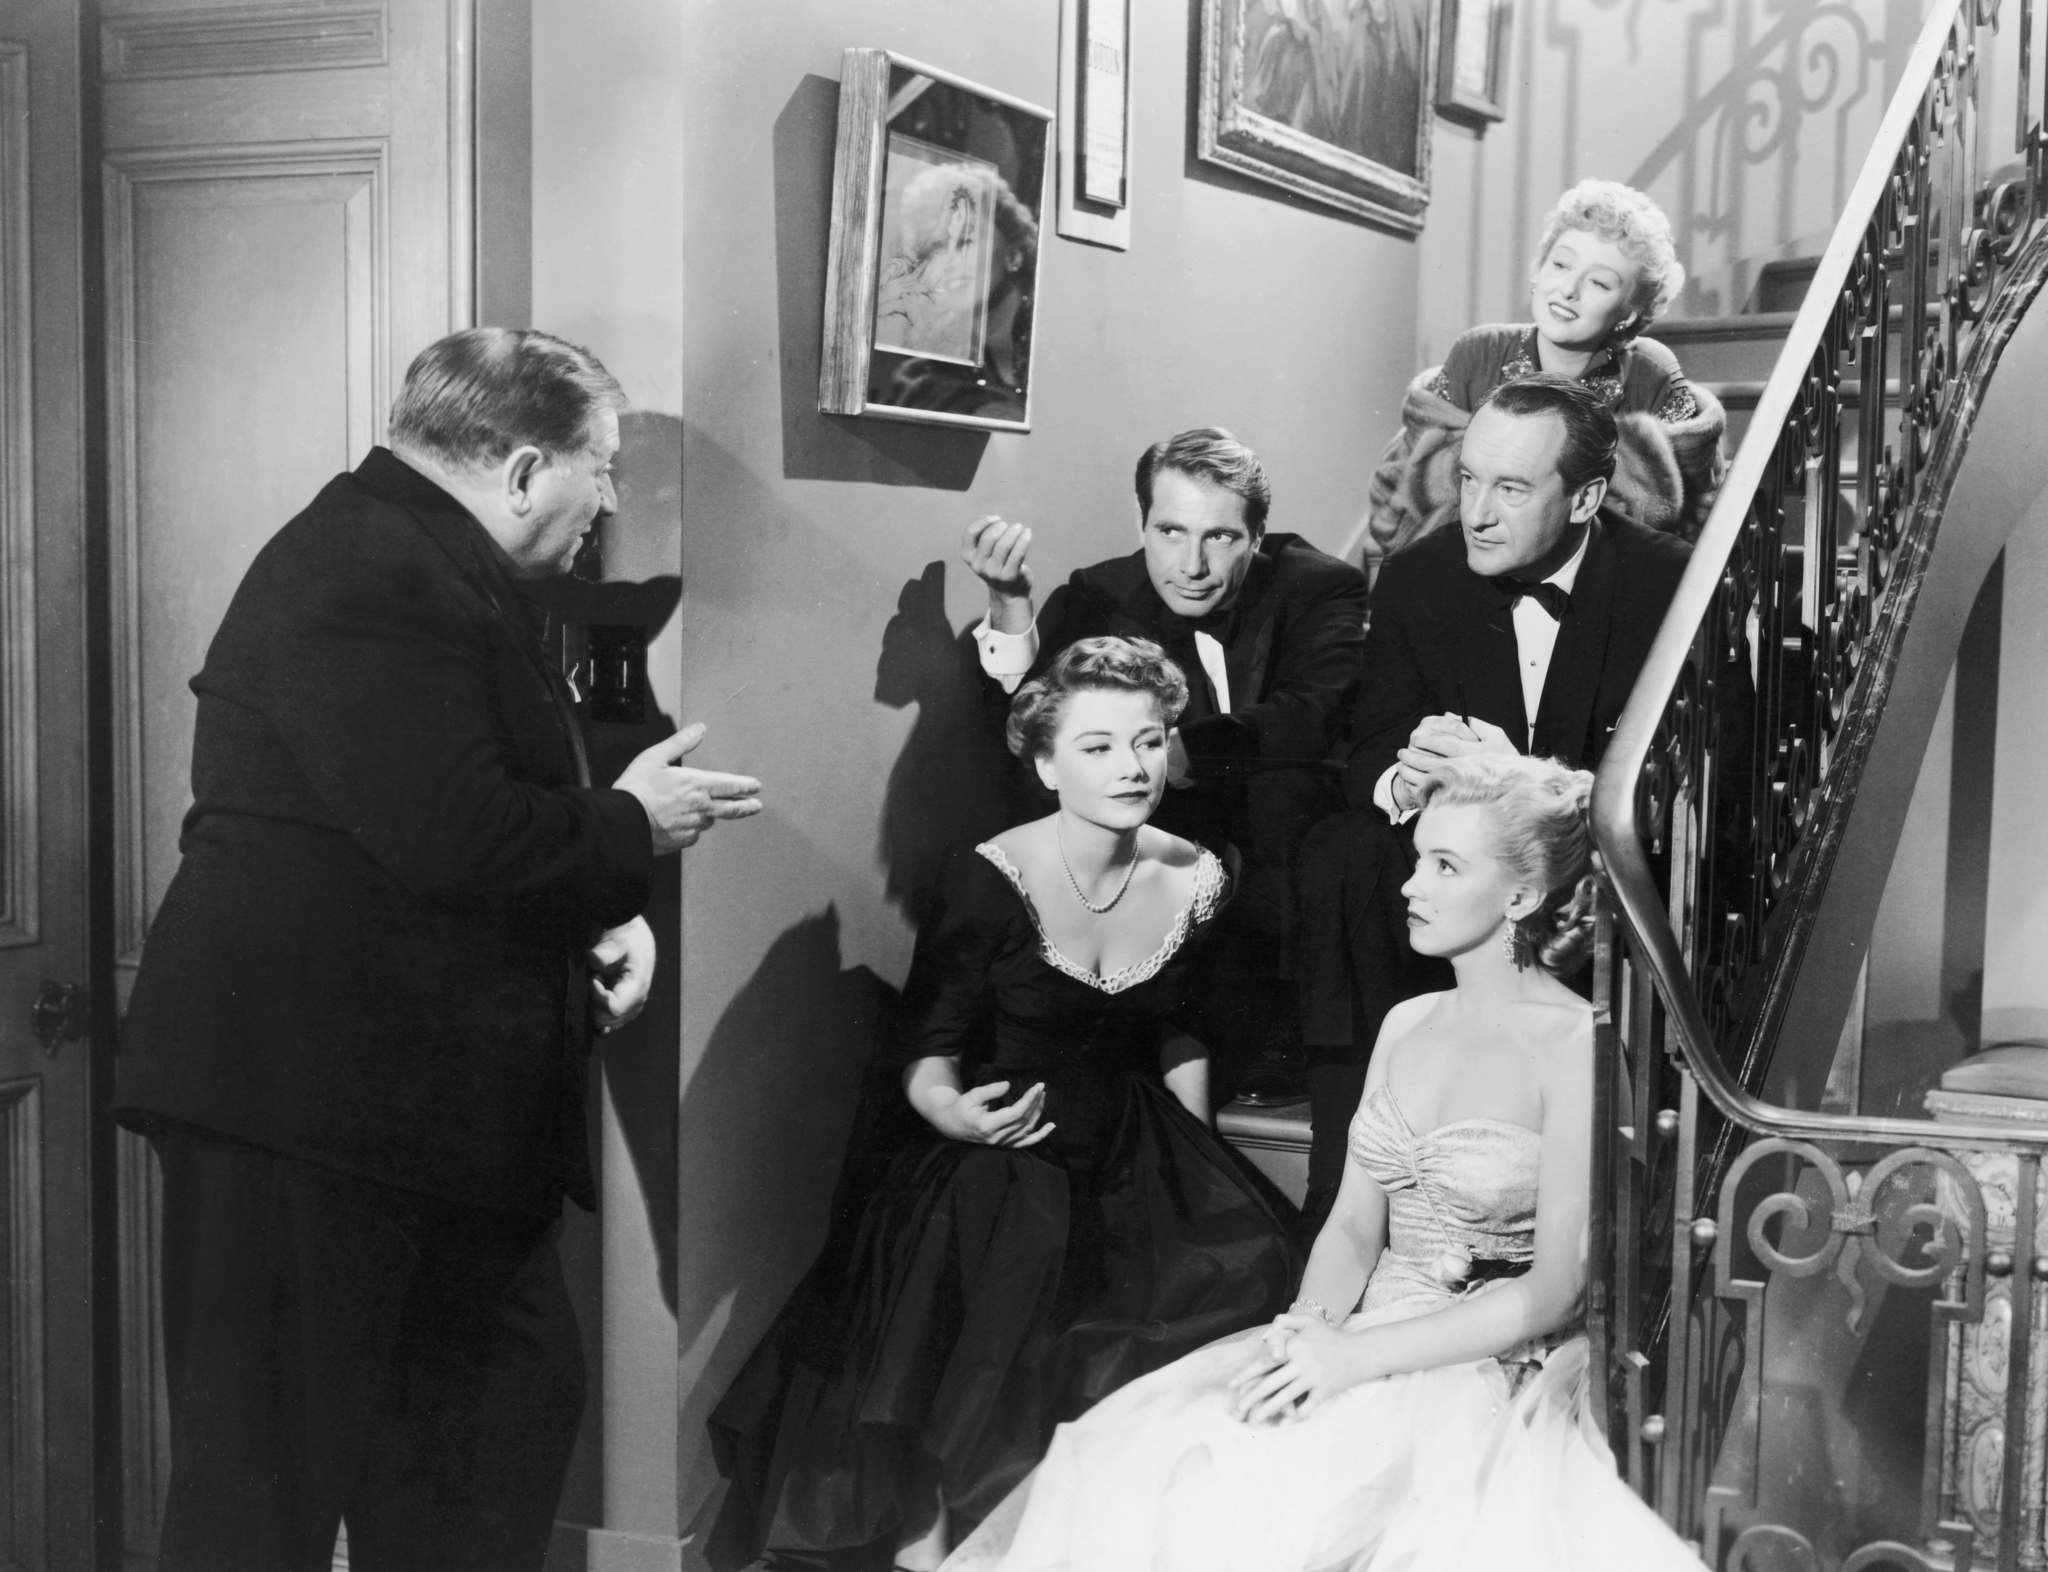 Marilyn Monroe, Celeste Holm, Gary Merrill and Gregory Ratoff at event of All About Eve (1950)